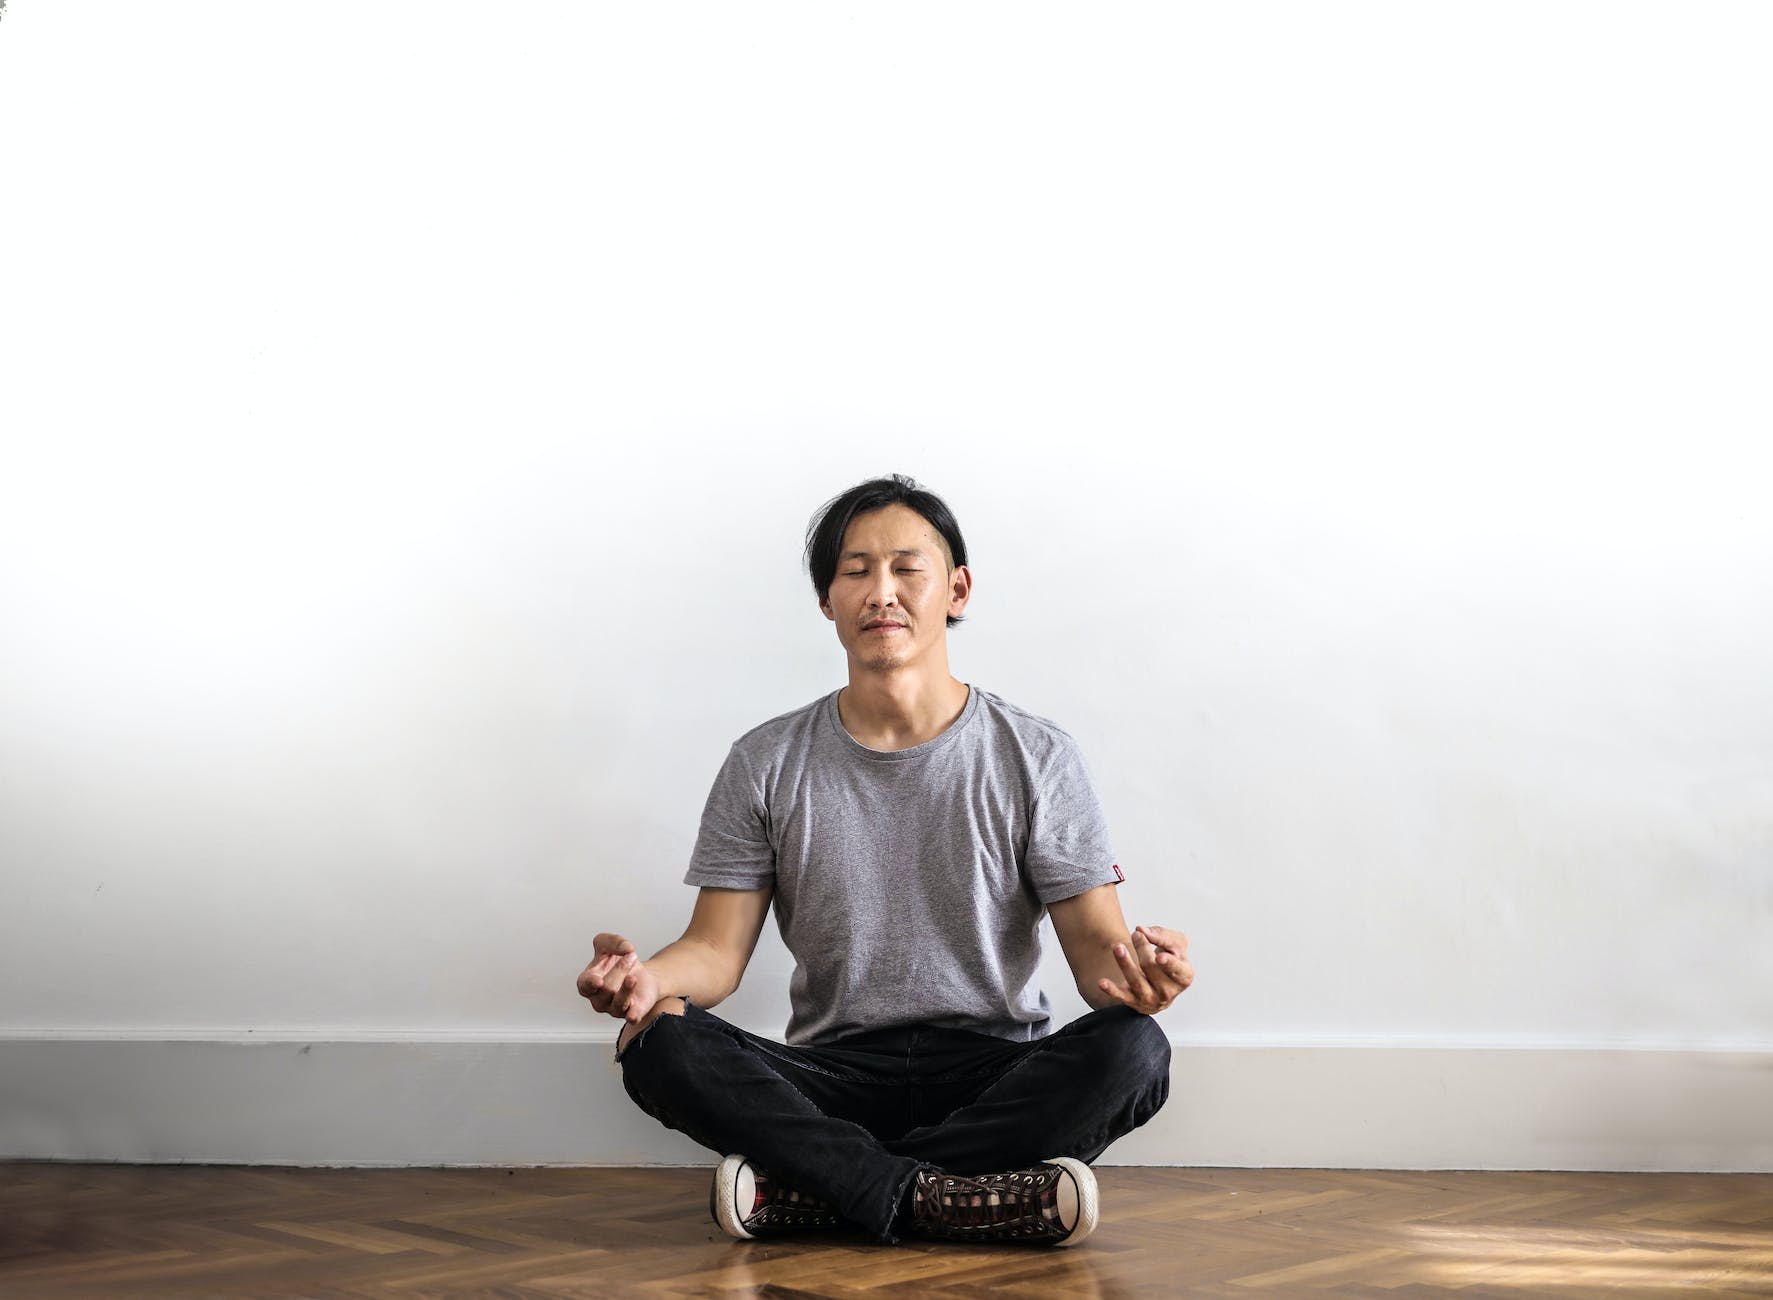 photo of man in gray t shirt and black jeans on sitting on wooden floor meditating